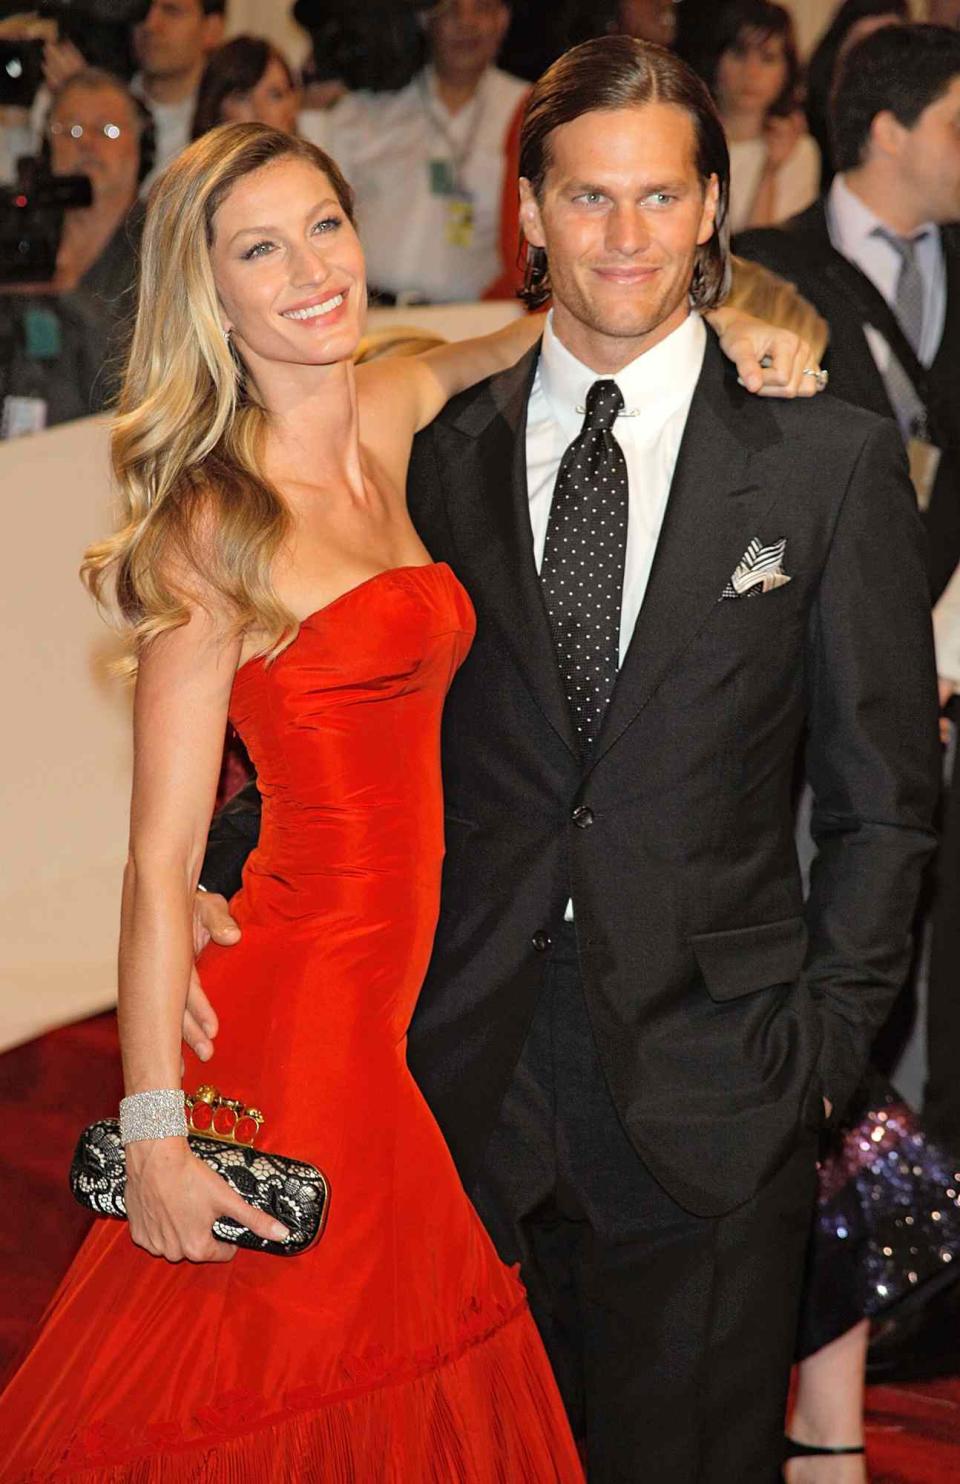 Gisele Bundchen and Tom Brady attends the "Alexander McQueen: Savage Beauty" Costume Institute Gala at The Metropolitan Museum of Art on May 2, 2011 in New York City